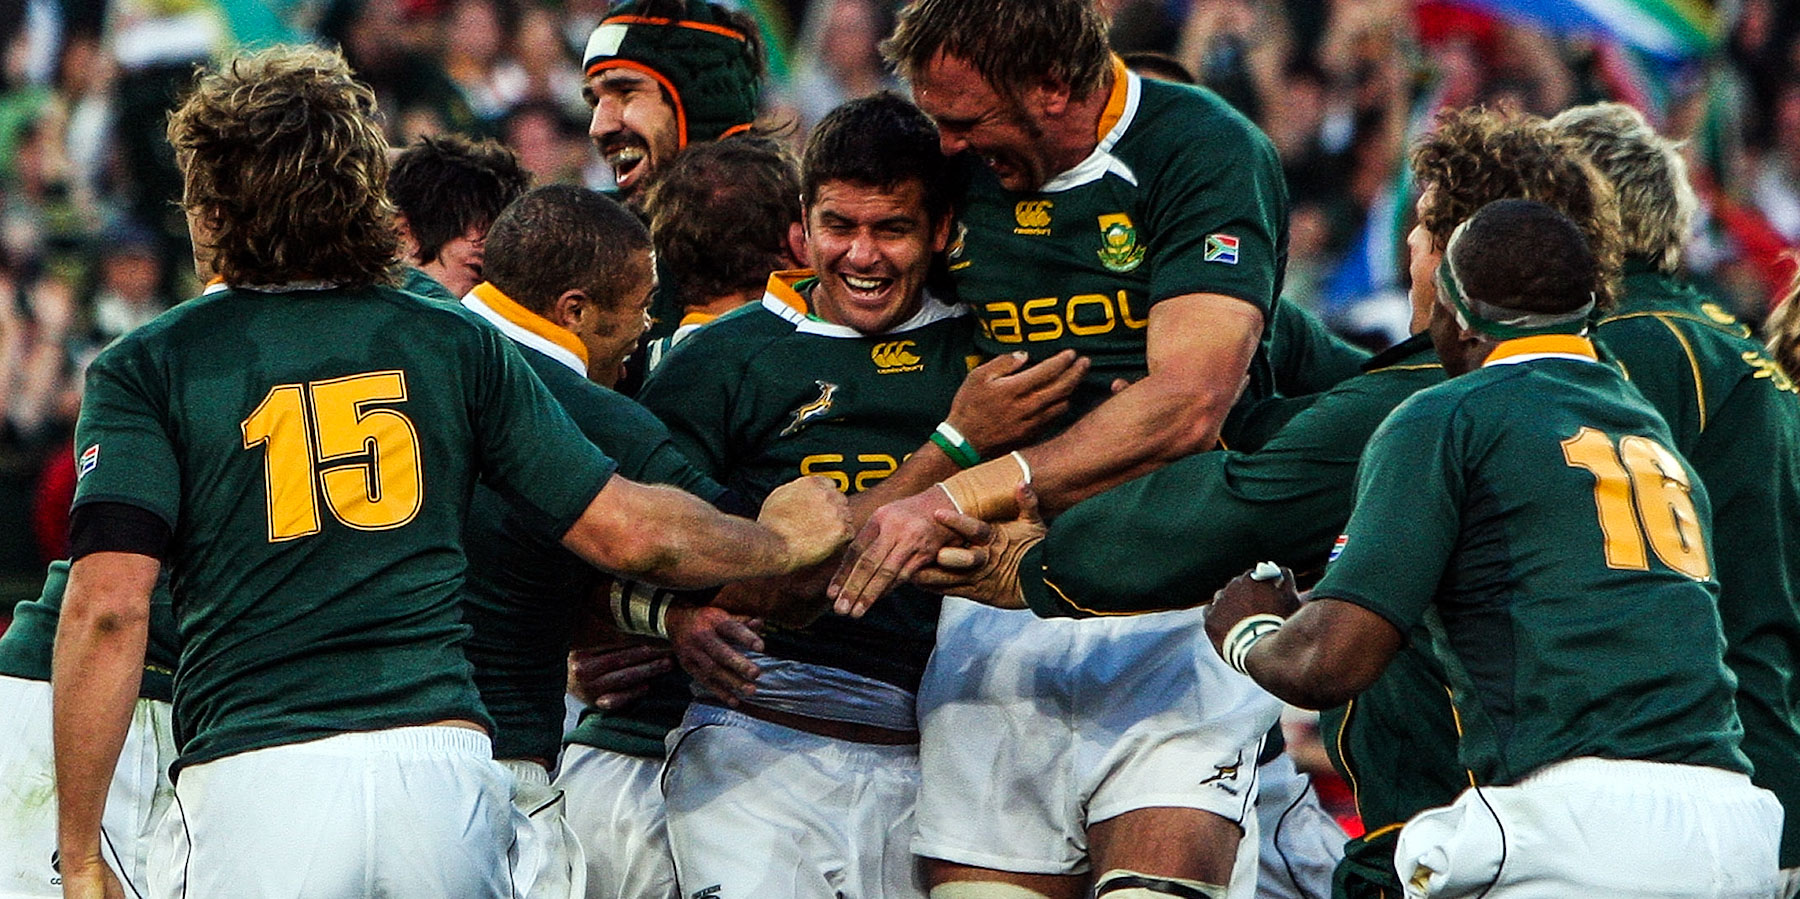 Swamped by ecstatic team-mates after kicking the series-winning penalty goal against the Lions in Pretoria in 2009.